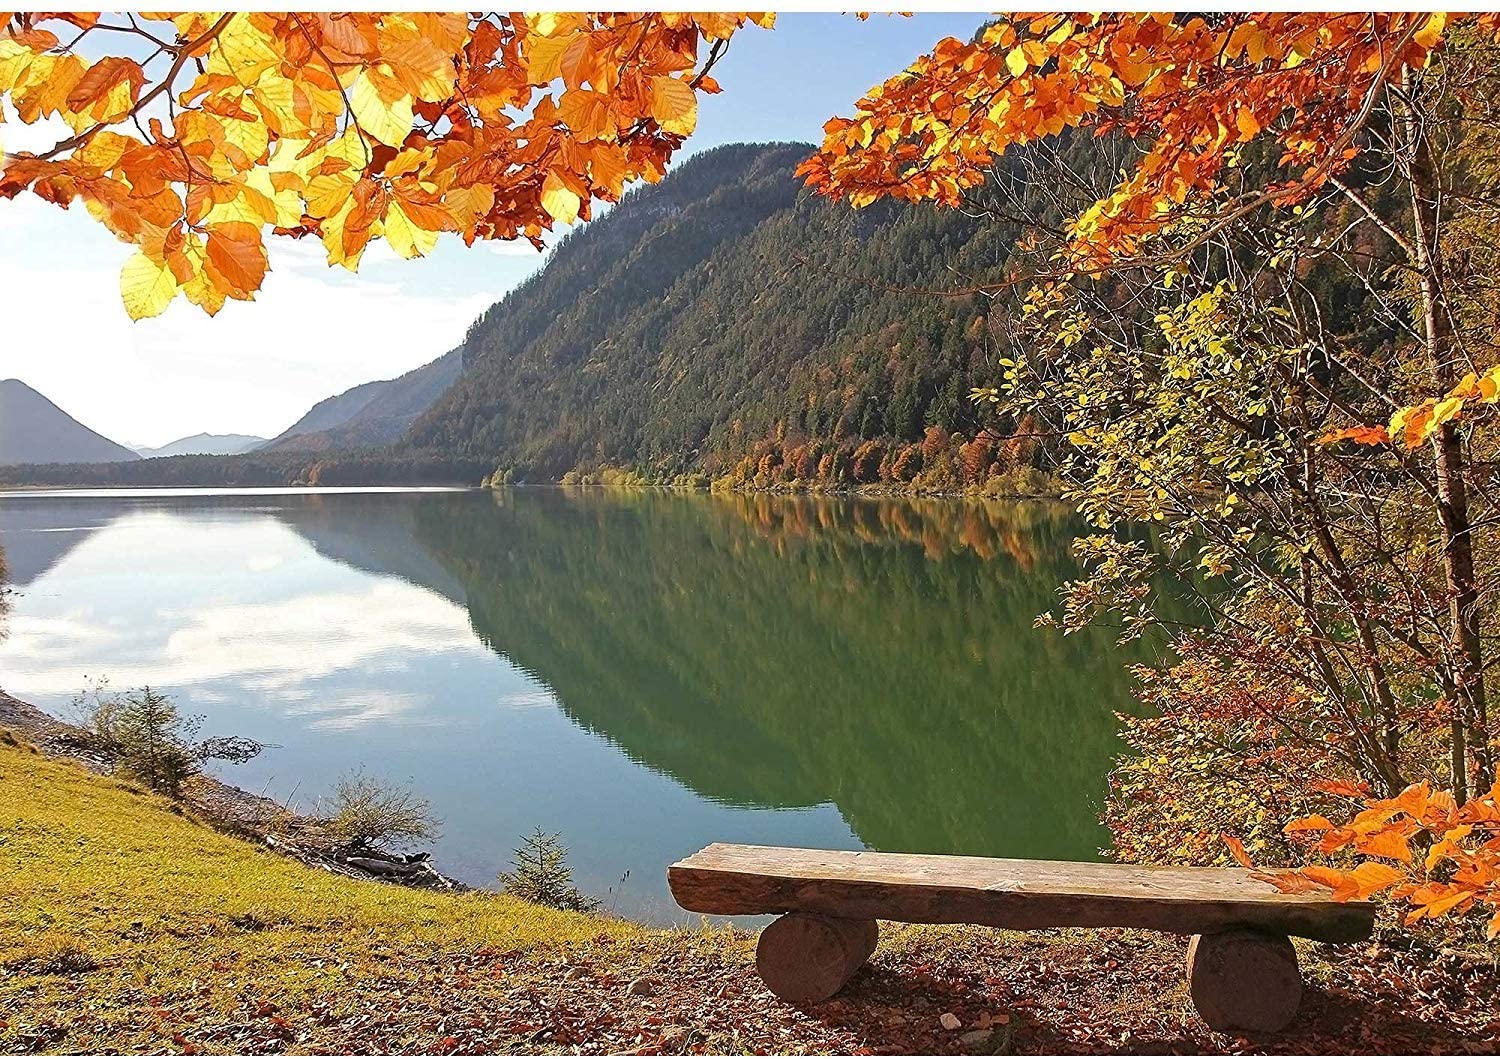 IRONANDGCFOXBOX Panoramic View To Idyllic Autumnal Lake Sylvenstein, Germany Wall Mural. Self Adhesive Large Wallpaper Inches, For Home Office Decor: Home & Kitchen